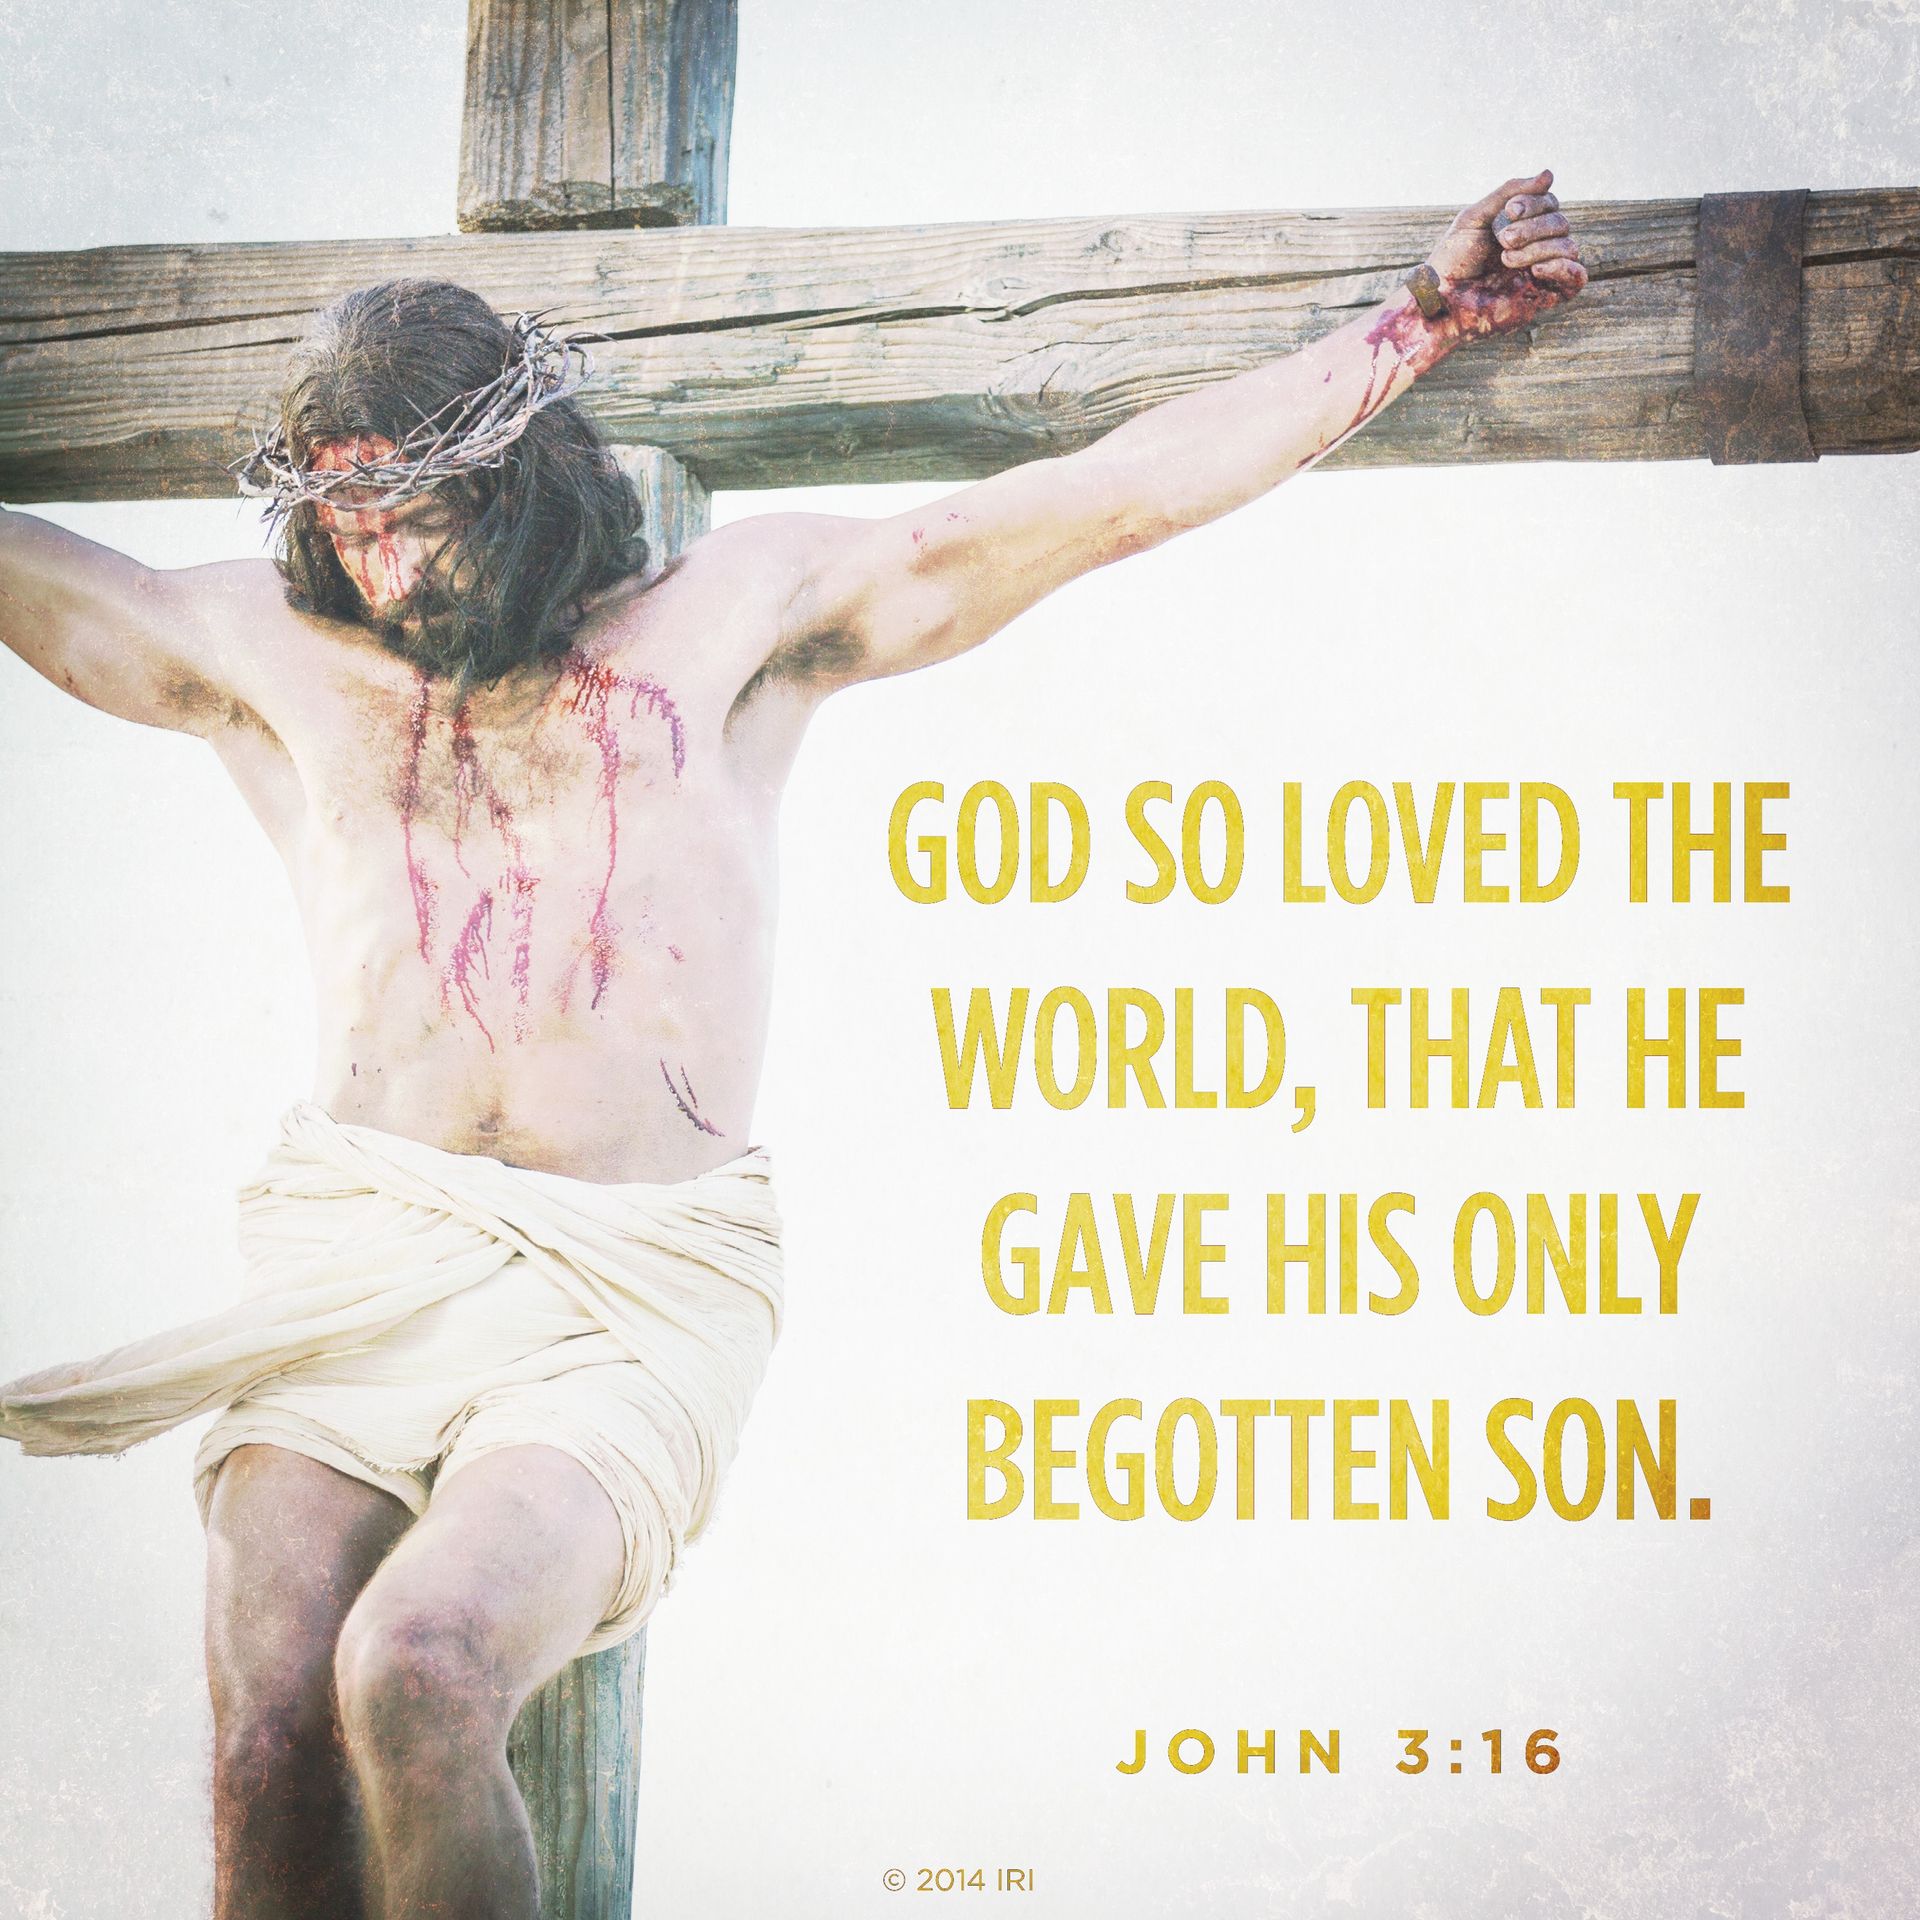 “God so loved the world, that he gave his only begotten Son.”—John 3:16